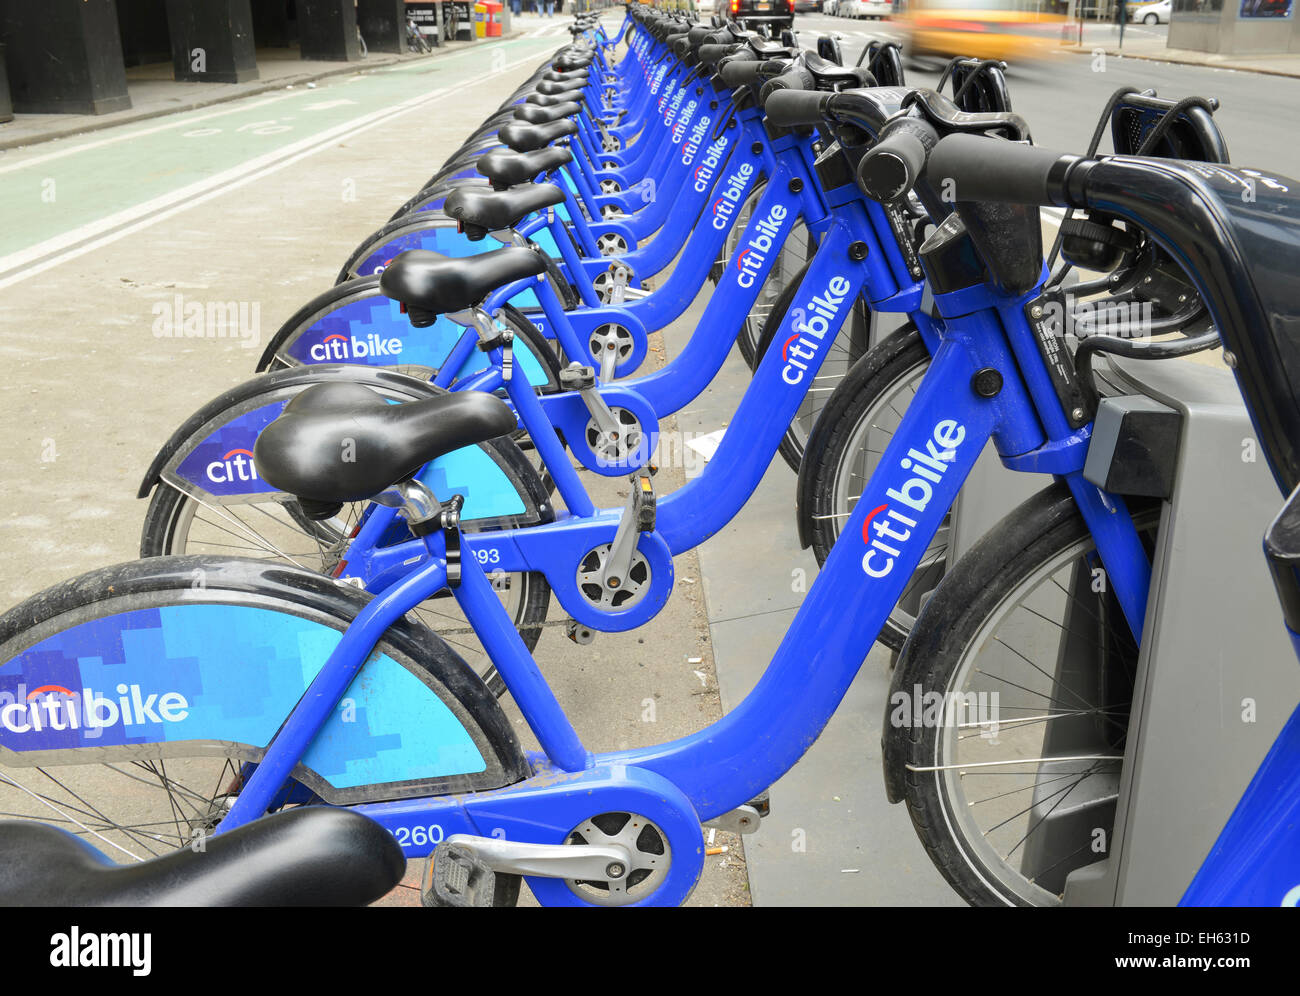 New York, March 2, 2014. Citi Bike, a Bicycle share program in Manhattan gives residents one more transportation option Stock Photo